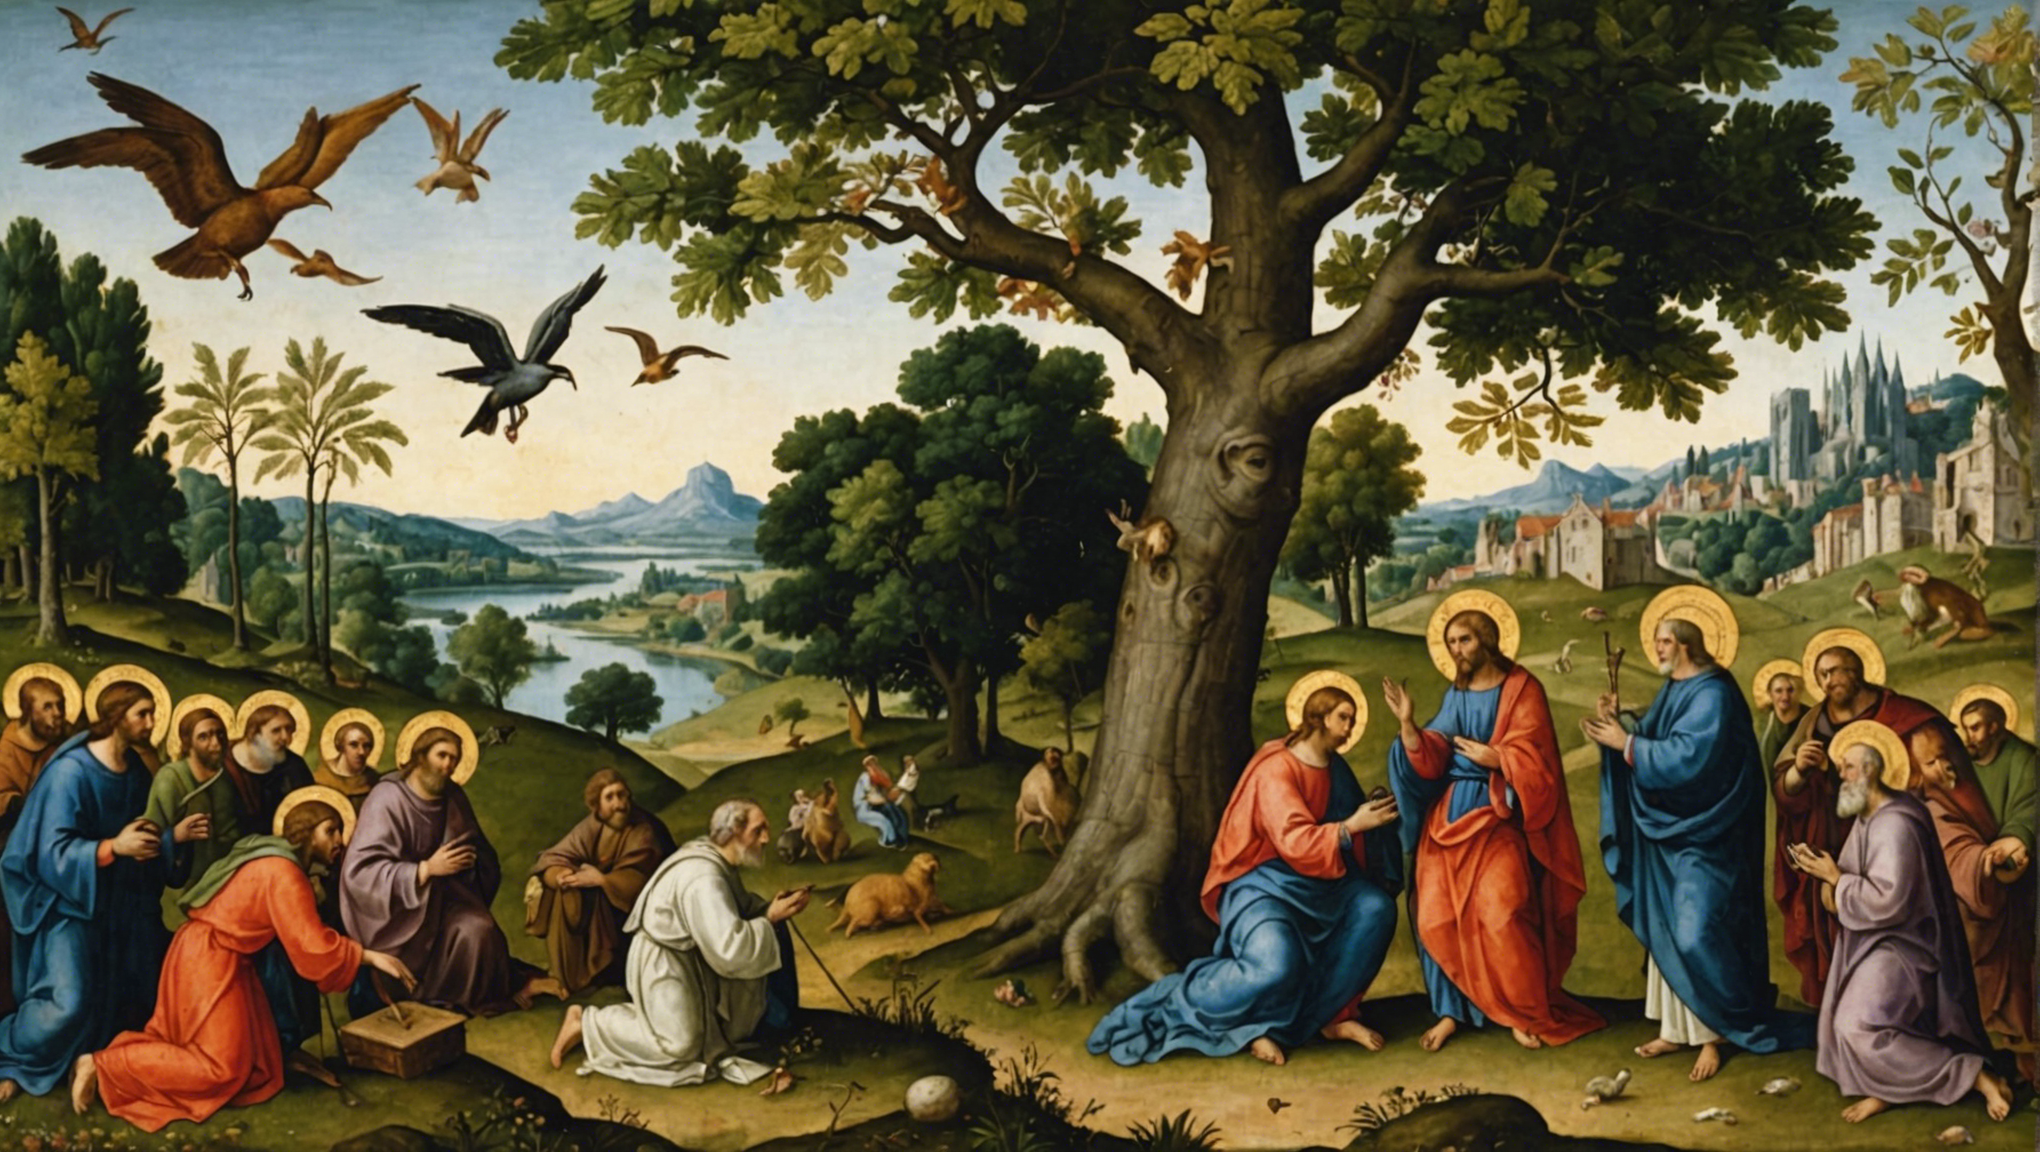 exploring the influence of theology on ecology through the creation story.